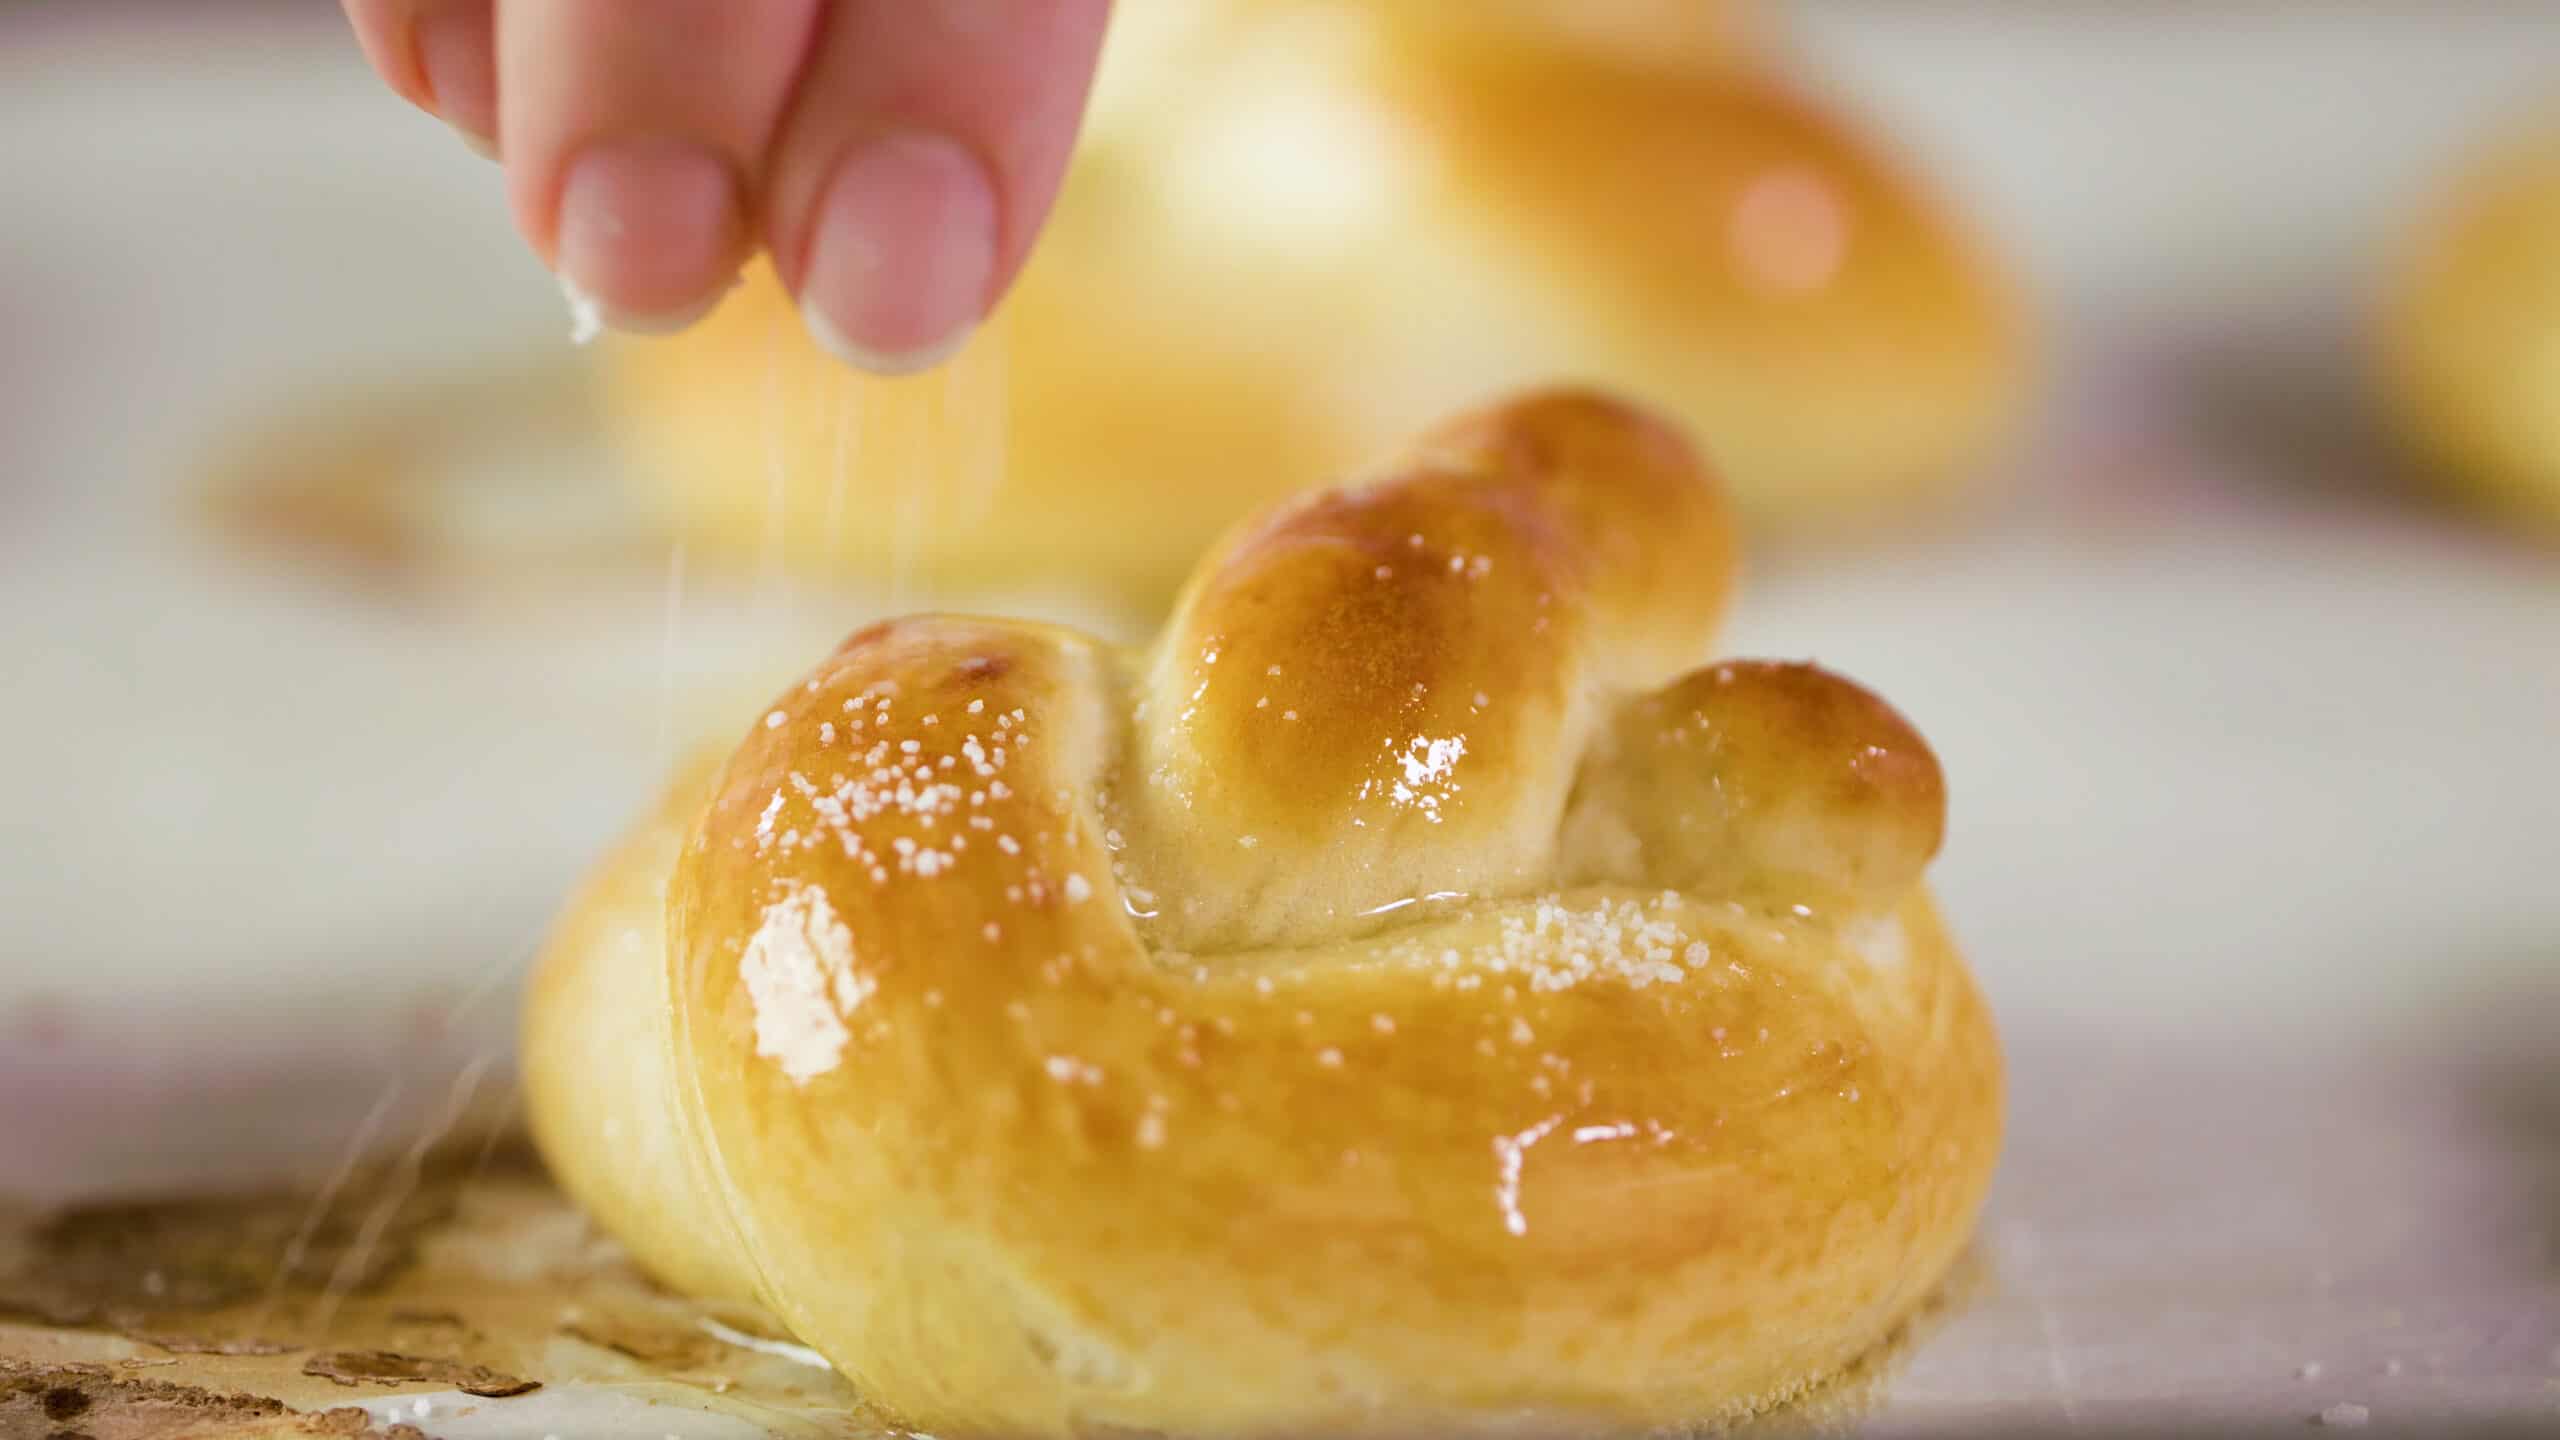 Close-up view of golden brown baked soft pretzel brushed with melted butter and a hand pinching sea salt on top.